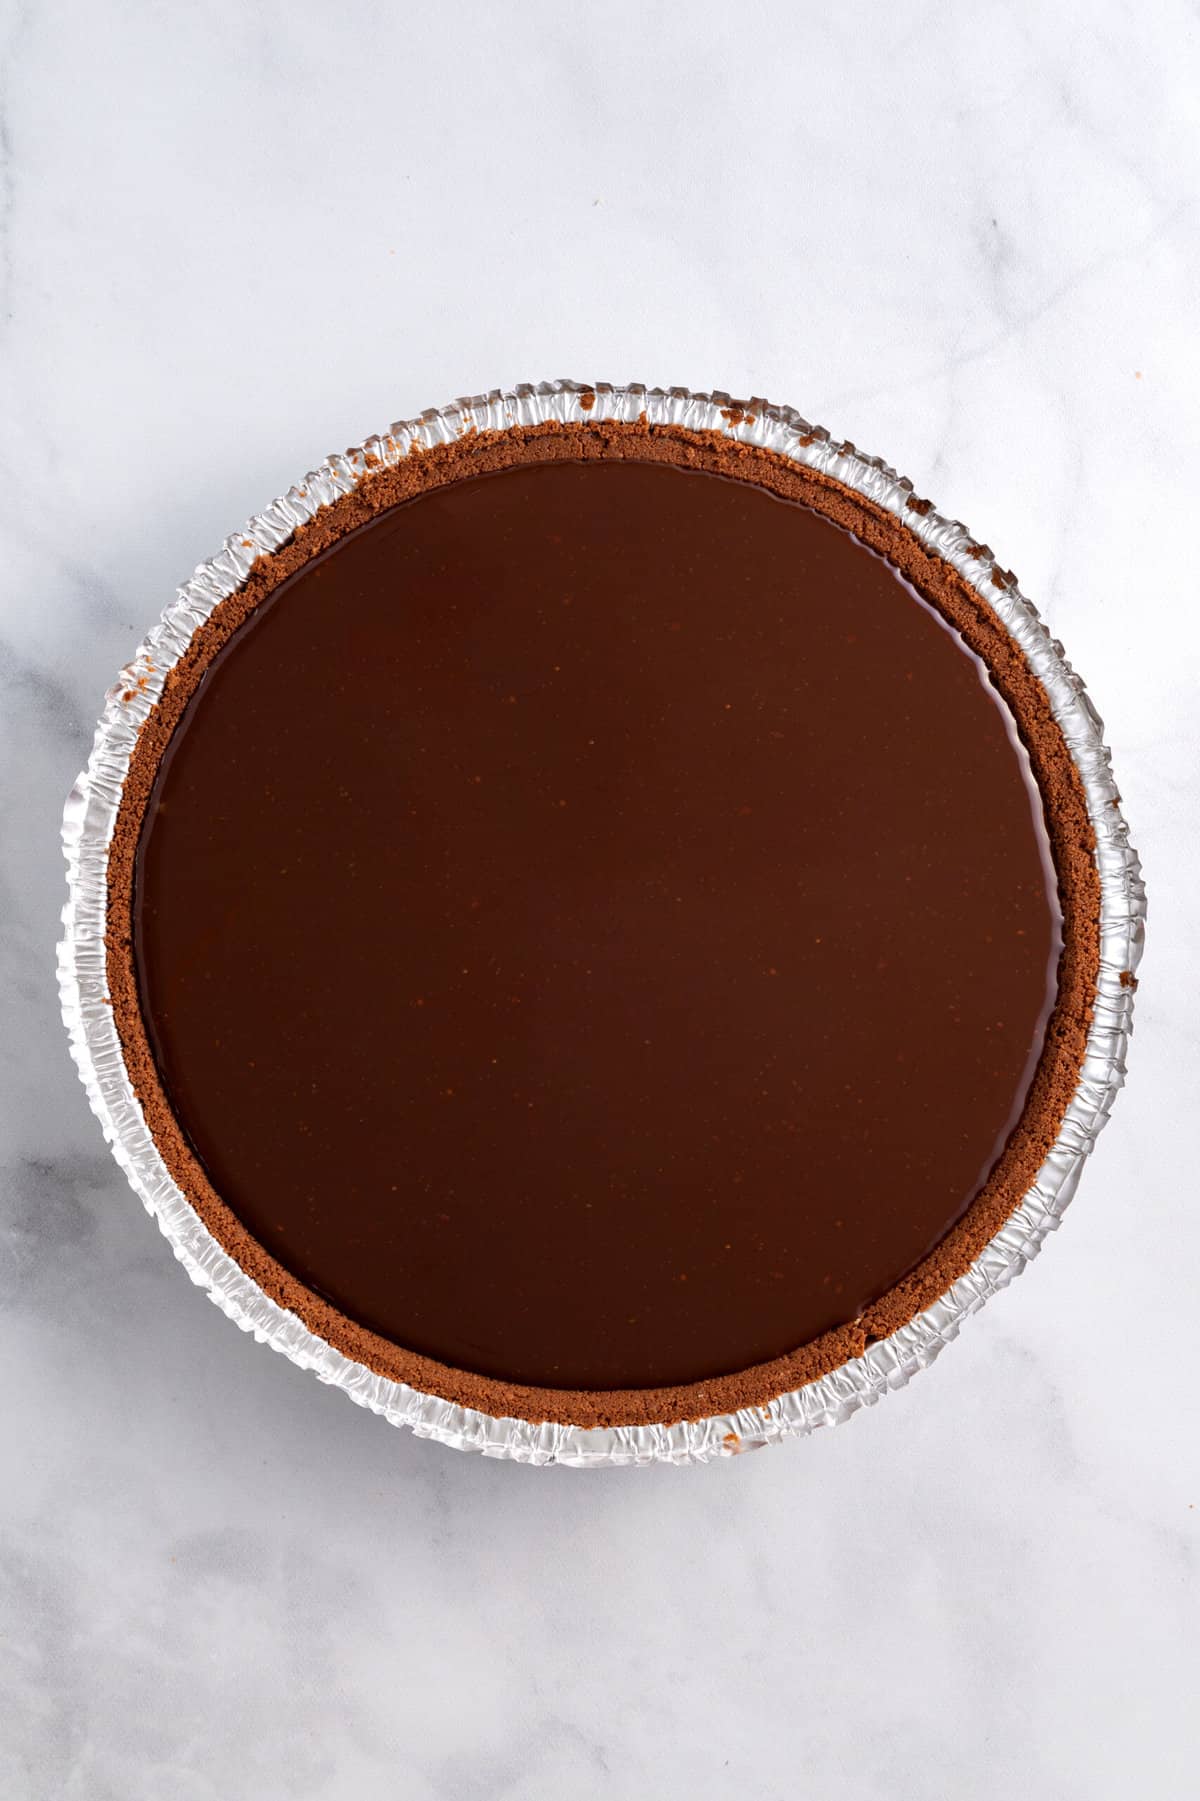 store-bought chocolate pie crust with peanut butter filling and chocolate ganache.